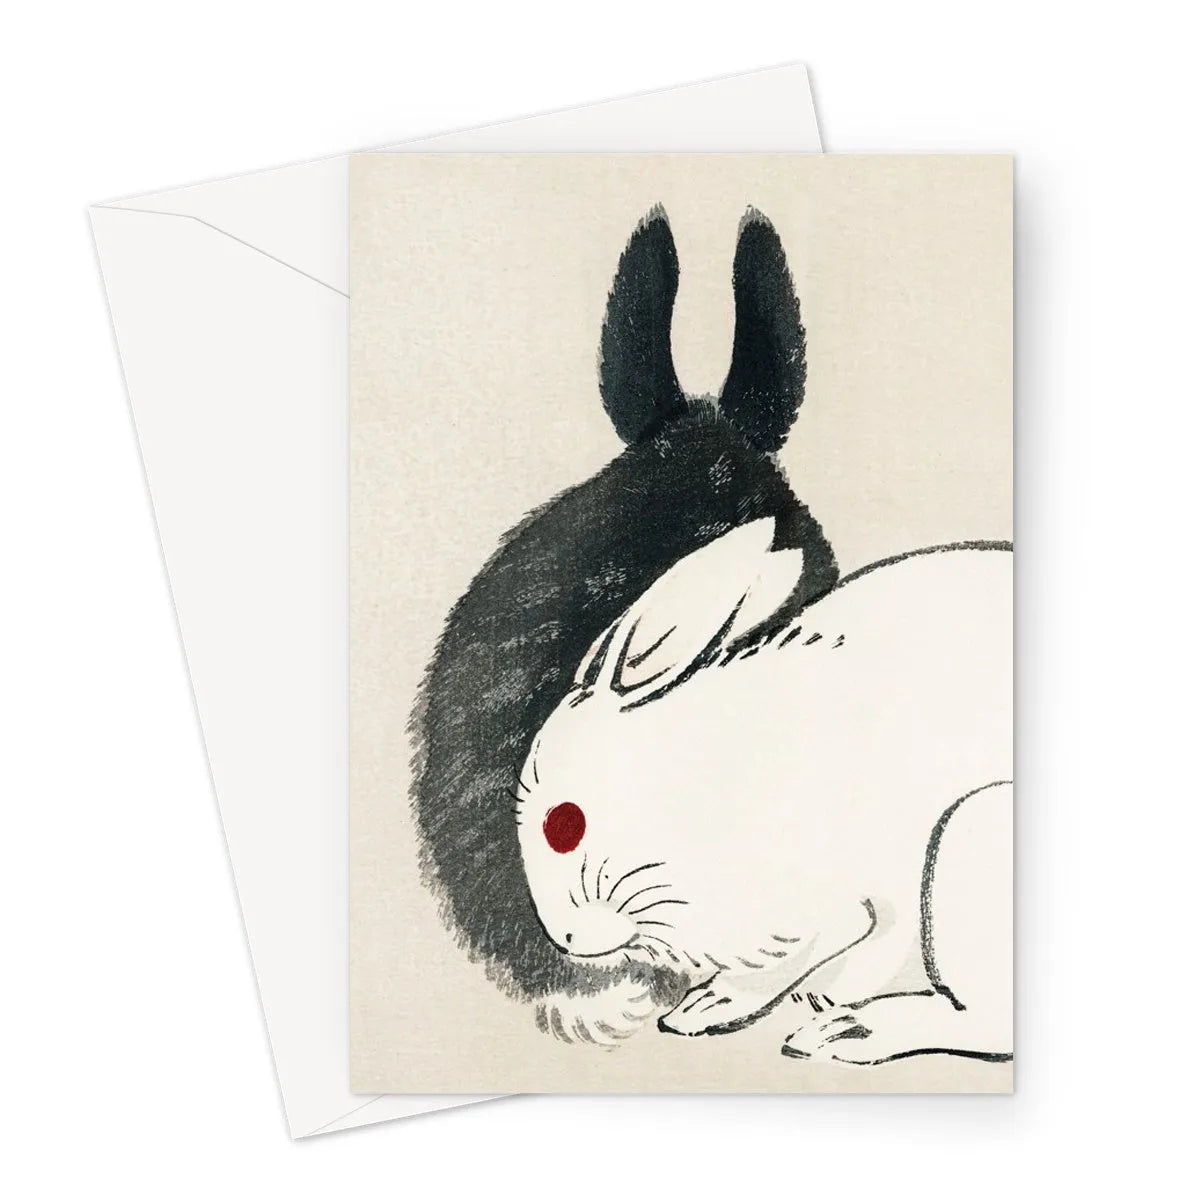 Black And White Rabbit By Kōno Bairei Greeting Card - A5 Portrait / 1 Card - Notebooks & Notepads - Aesthetic Art